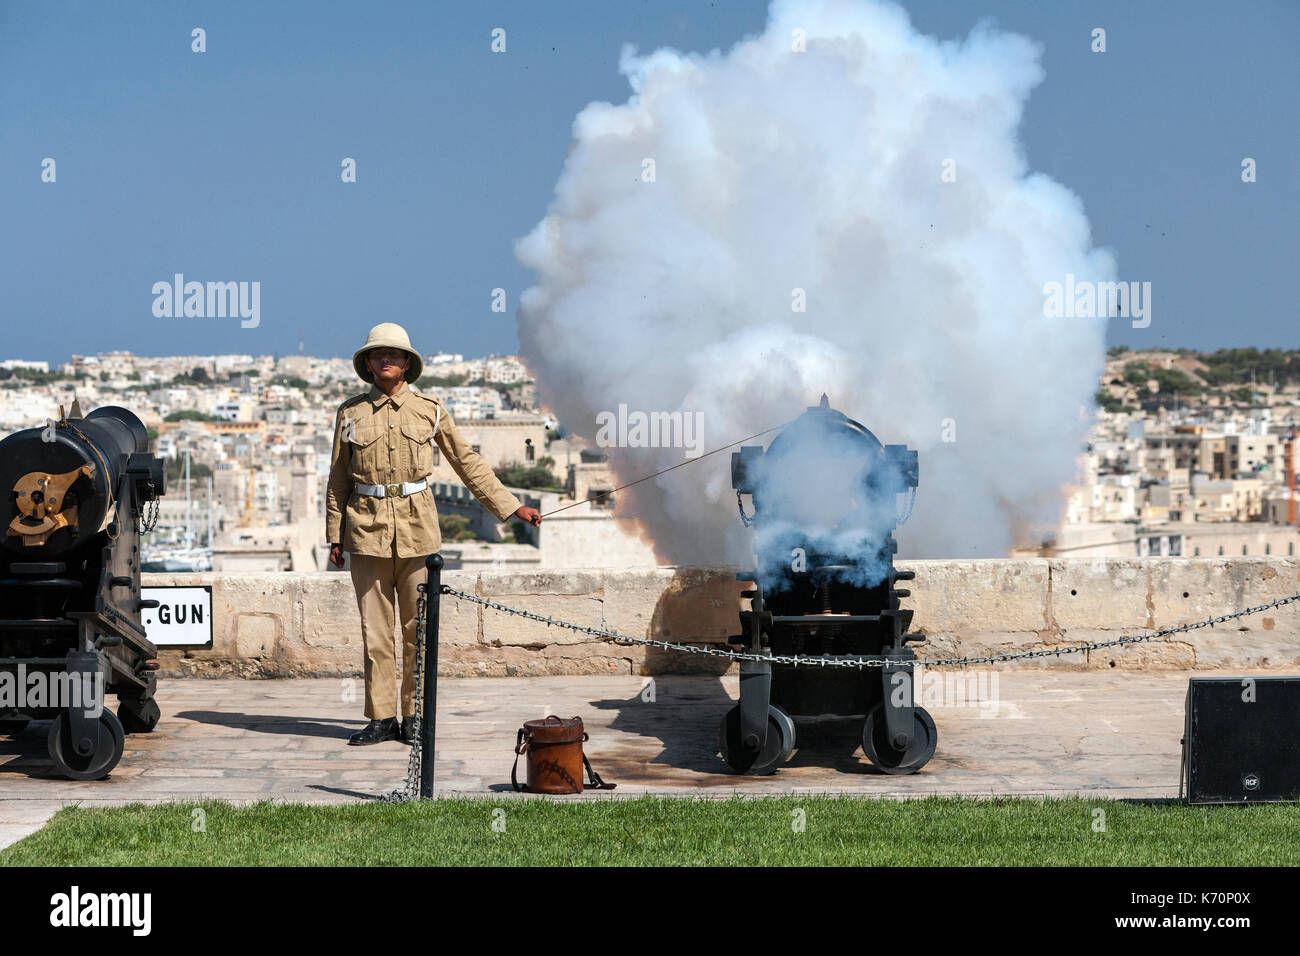 A young gunner fires Malta’s noon cannon to mark the midday hour. The noon gun salute is an old naval tradition that was re-established in 2004 and oc Stock Photo